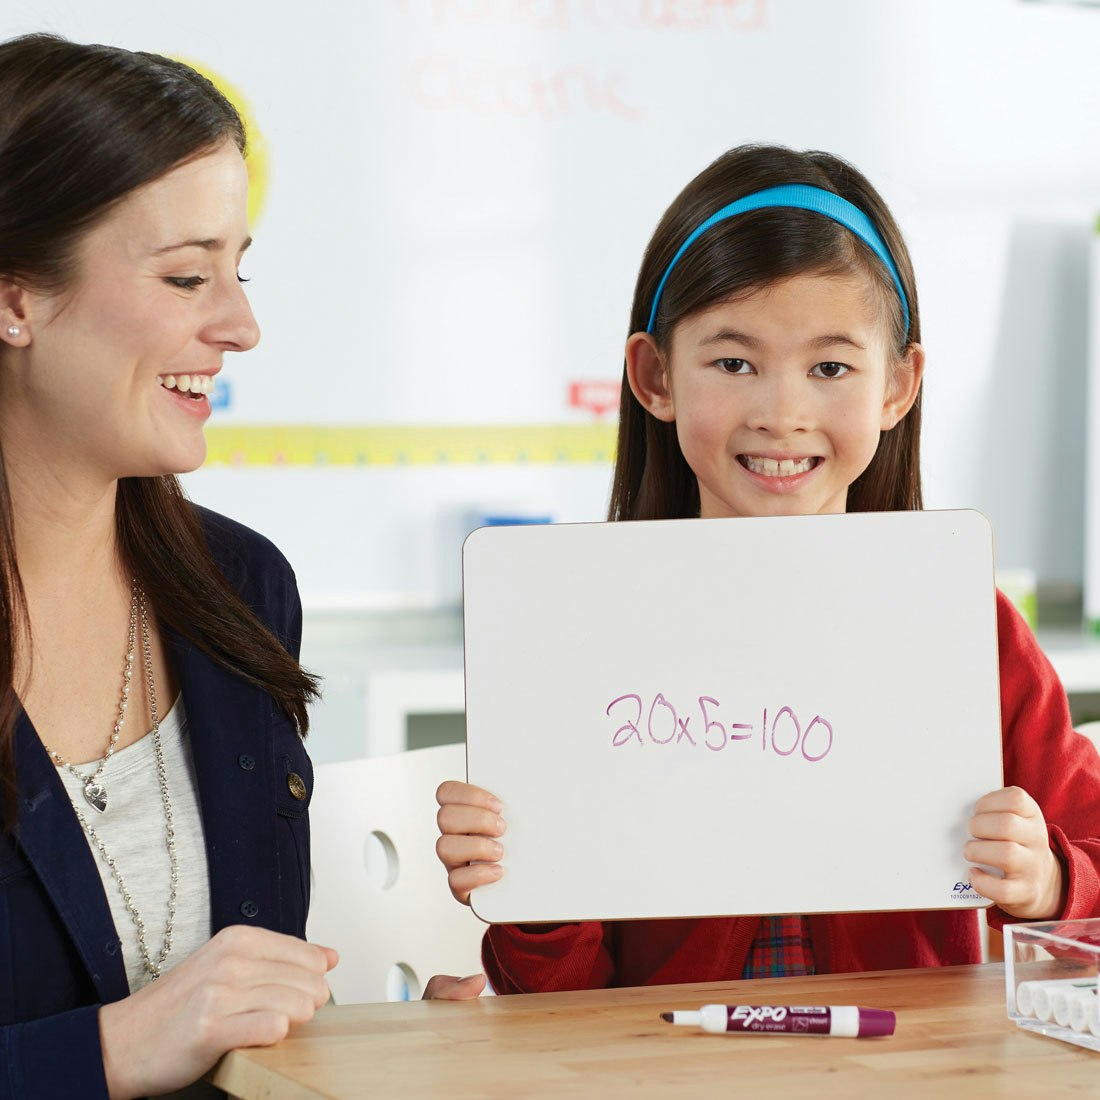 girl-holding-up-whiteboard-with-math-equation-on-it.jpg